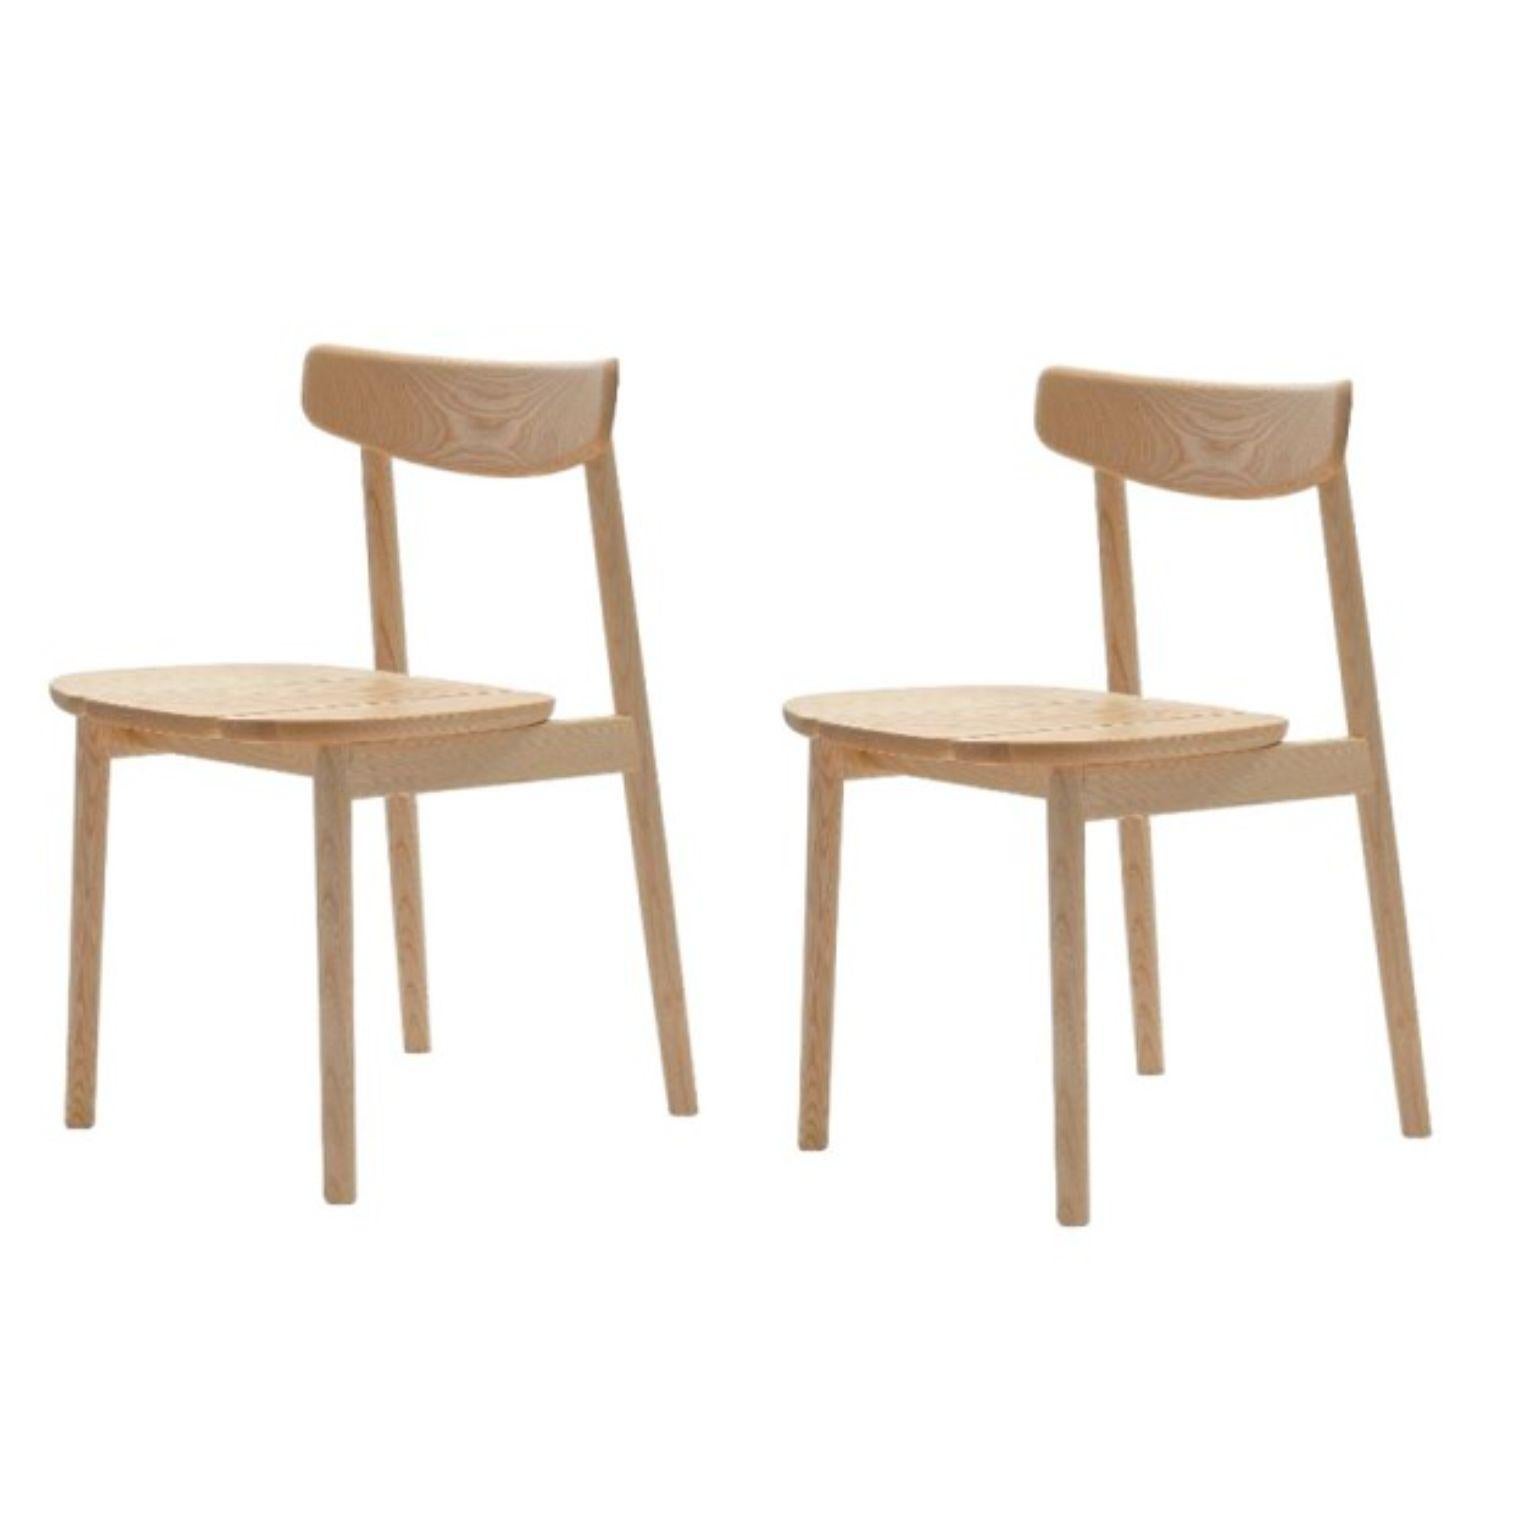 Natural Oak Klee chairs 1 by Sebastian Herkner
Materials: Natural Oak.
Technique: Varnished.
Dimensions: D 45 x W 42 x H 78 cm 
Available in Black Stained Ash. 


COEDITION is a French publisher of high-end contemporary furniture created in